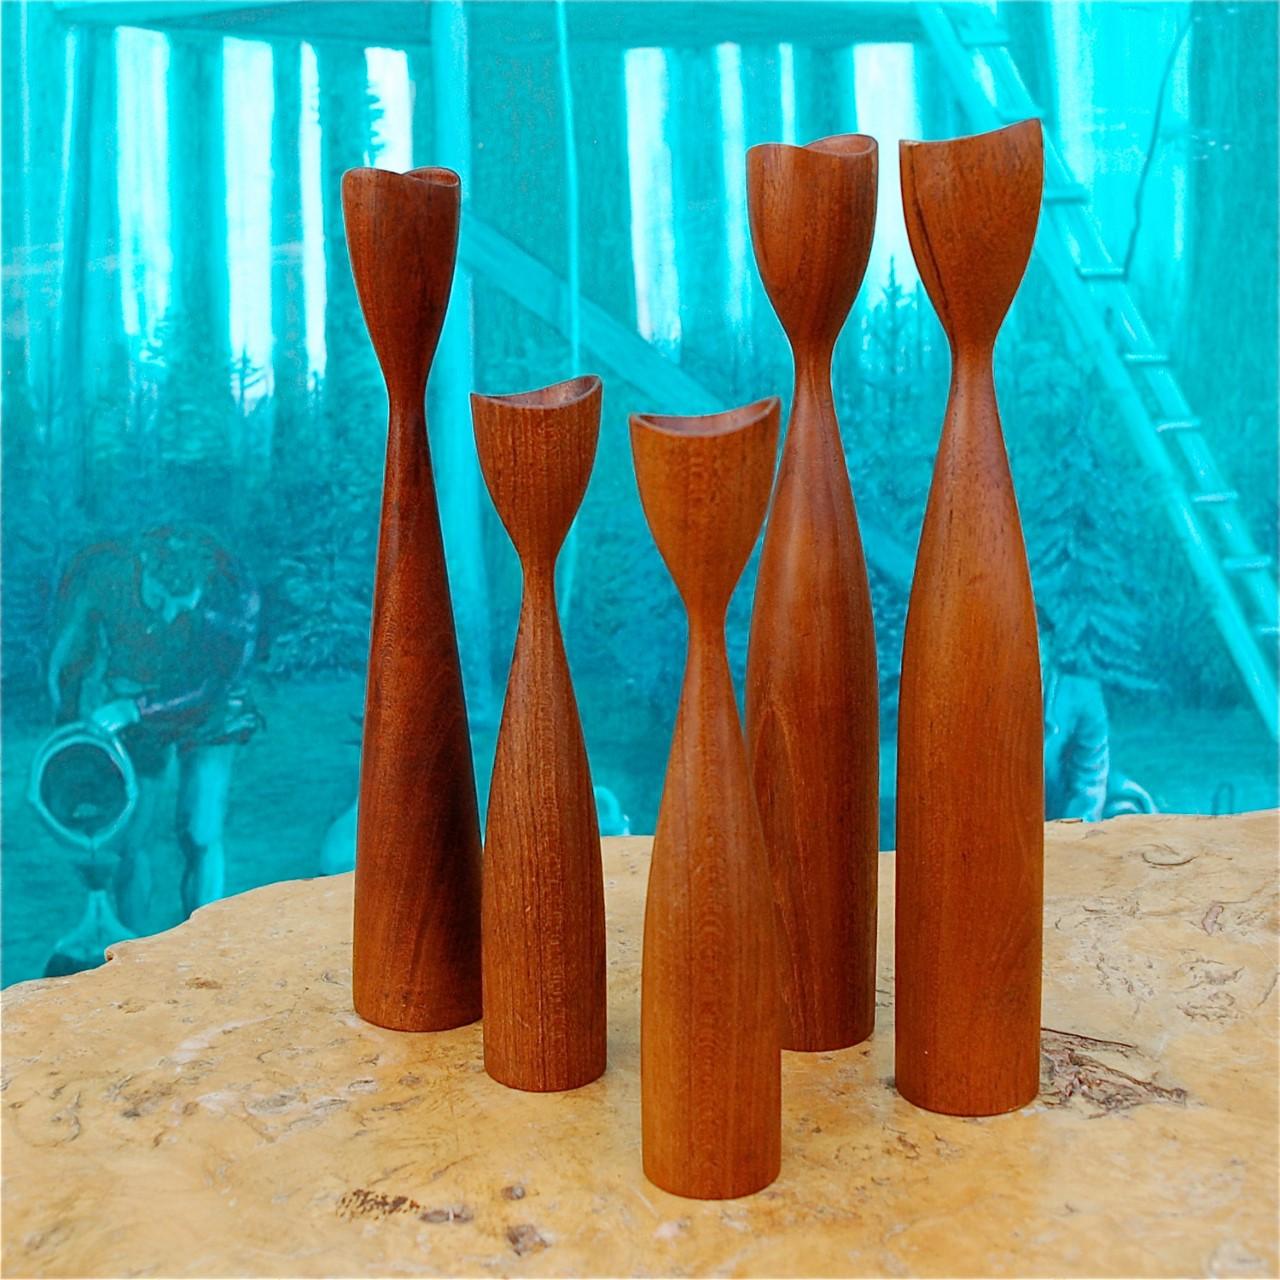 Set of 5 solid turned teak, wooden Danish candleholders. The pieces are different in size and we have put them together as a set. The teak has a lovely depth of color and grain. Their tapered, elongated, elegant shape makes them very tactile pieces.